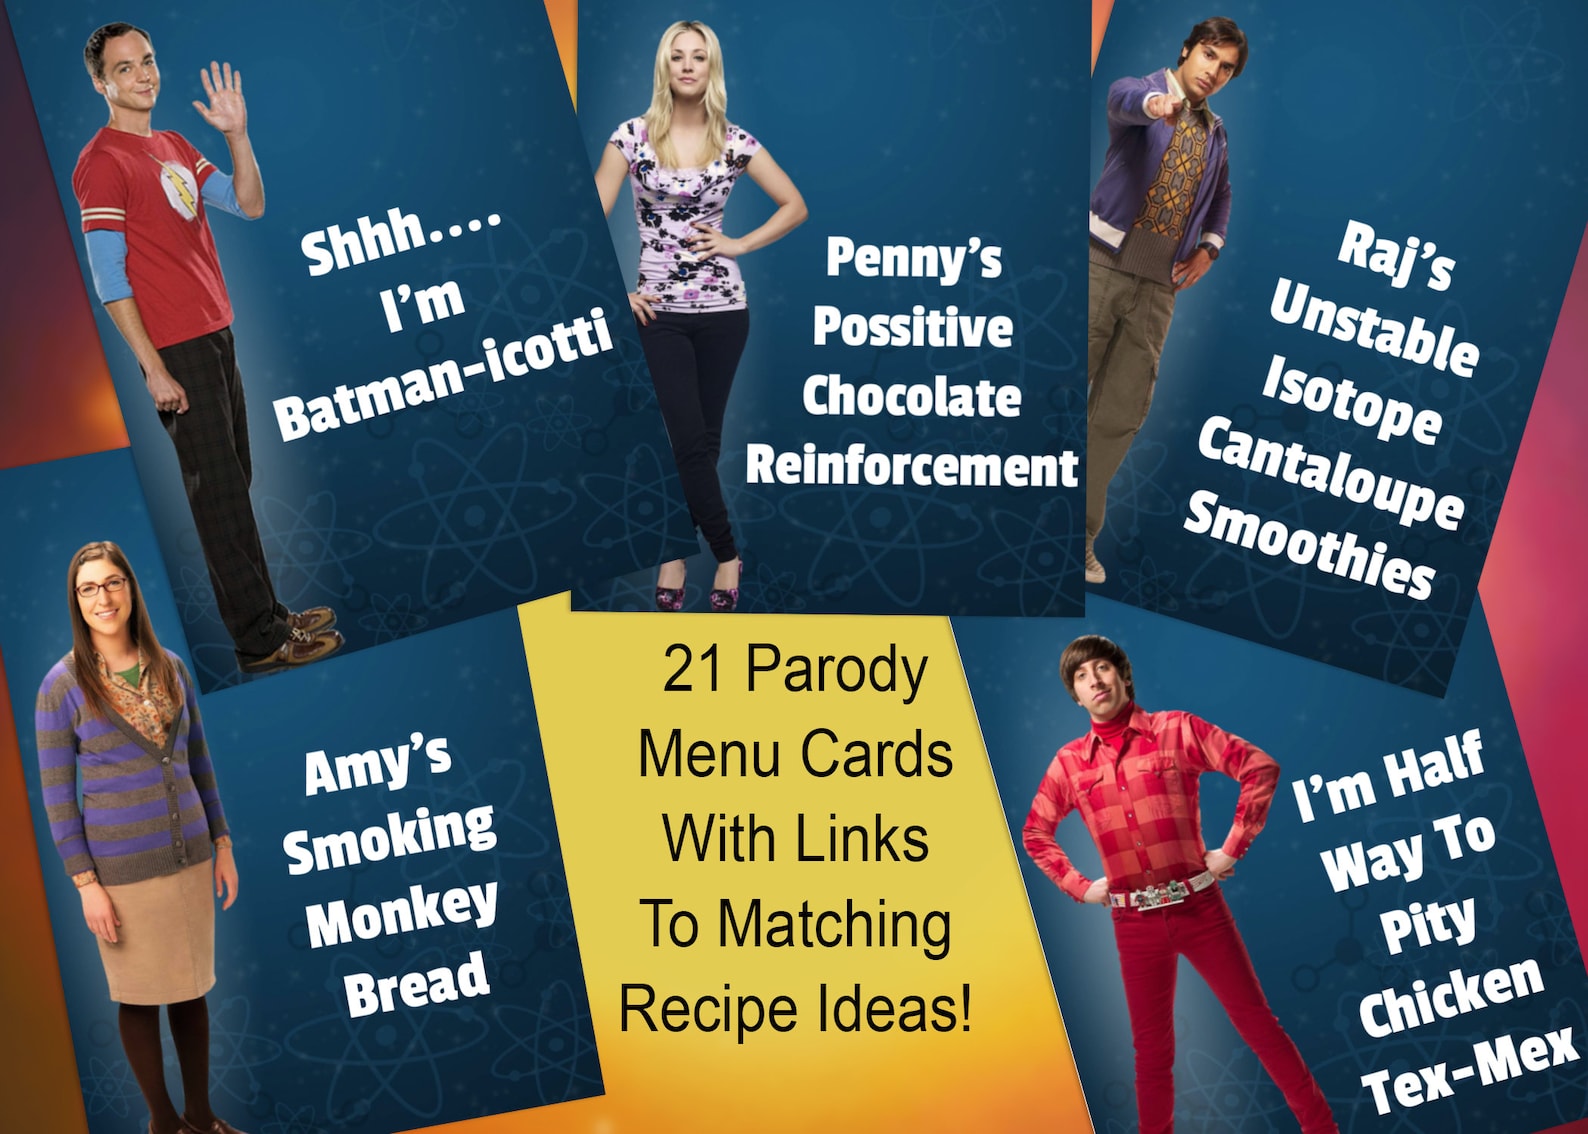 21 Editable The Big Bang Theory Parody Buffet Table Cards With Etsy 